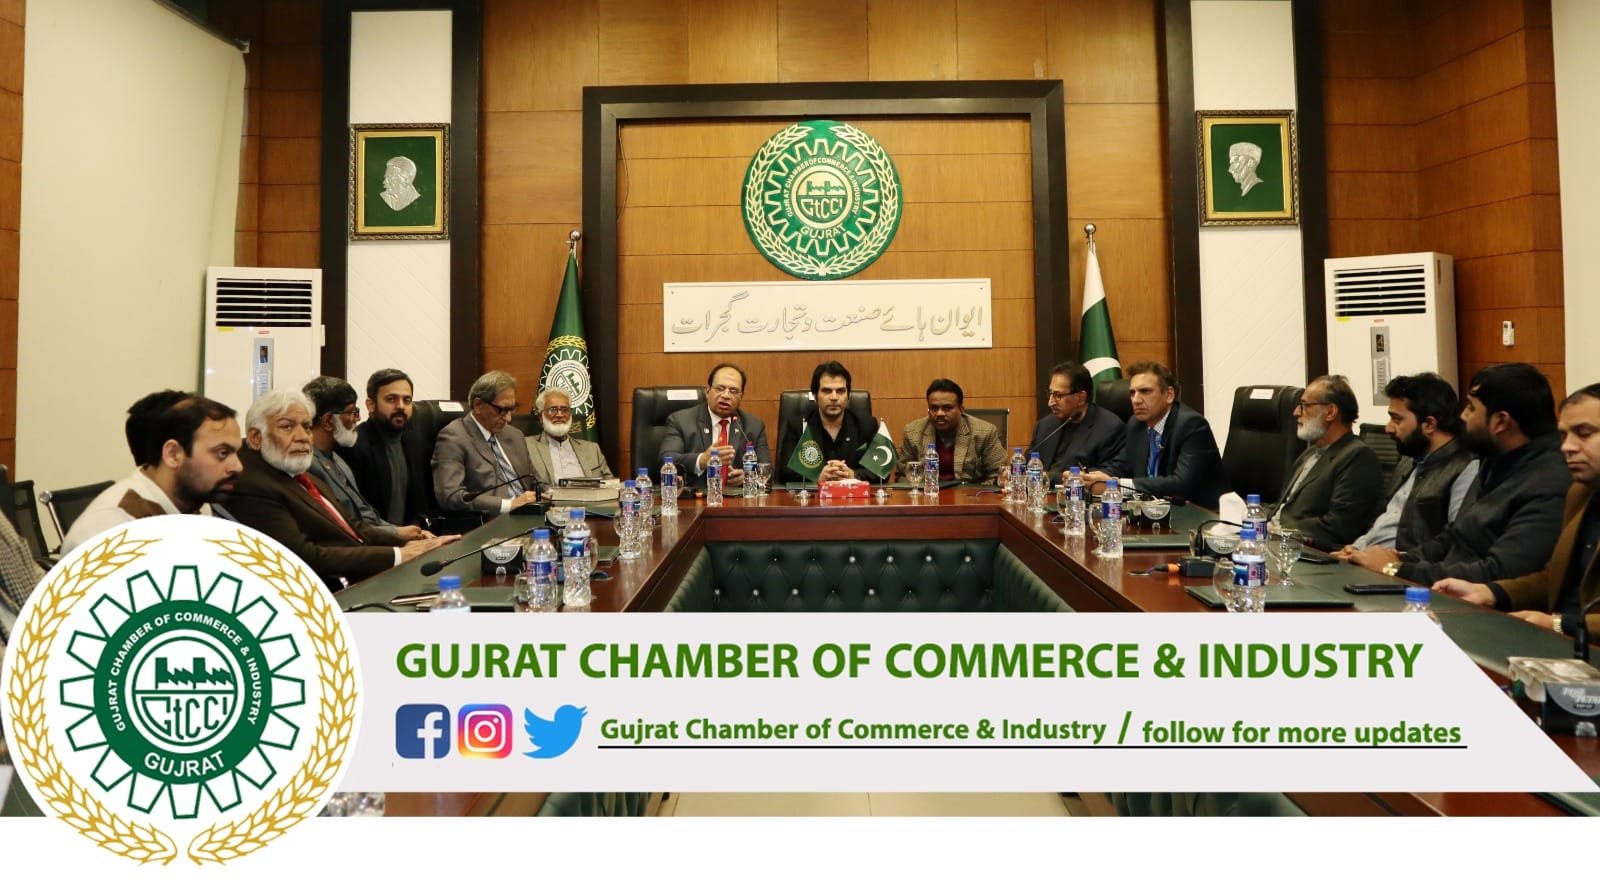 A Delegation National Peace and Justice Council Government of Pakistan   and Common Wealth Entrepreneur Club visited Gujrat Chamber of Commerce & Industry  and had a meeting with Business Community of Gujrat in the presidency of Mr. Sikander Ishfaq Razi President #GtCCI and Mr. Ch. M. Asad Bhatti. Mr. Saith Qamar Khurshid #Former VicePresident , Mr. Muhammad Ashraf Janjua #Executive Member and Mr. Muhammad Usman Muzaffar Secretary General #GtCCI were also present.